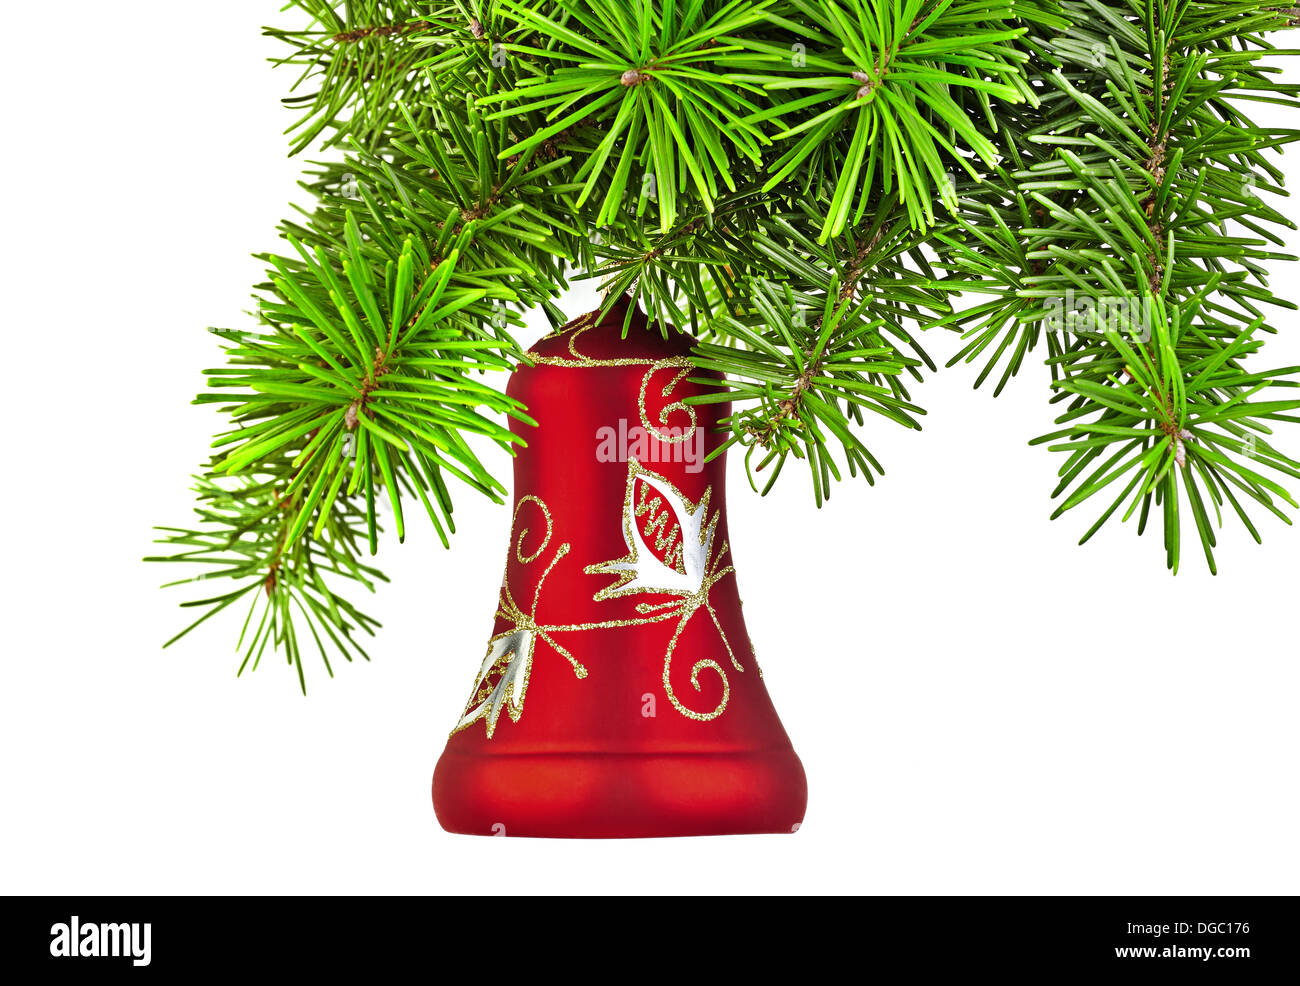 Christmas red bell on new year tree Stock Photo